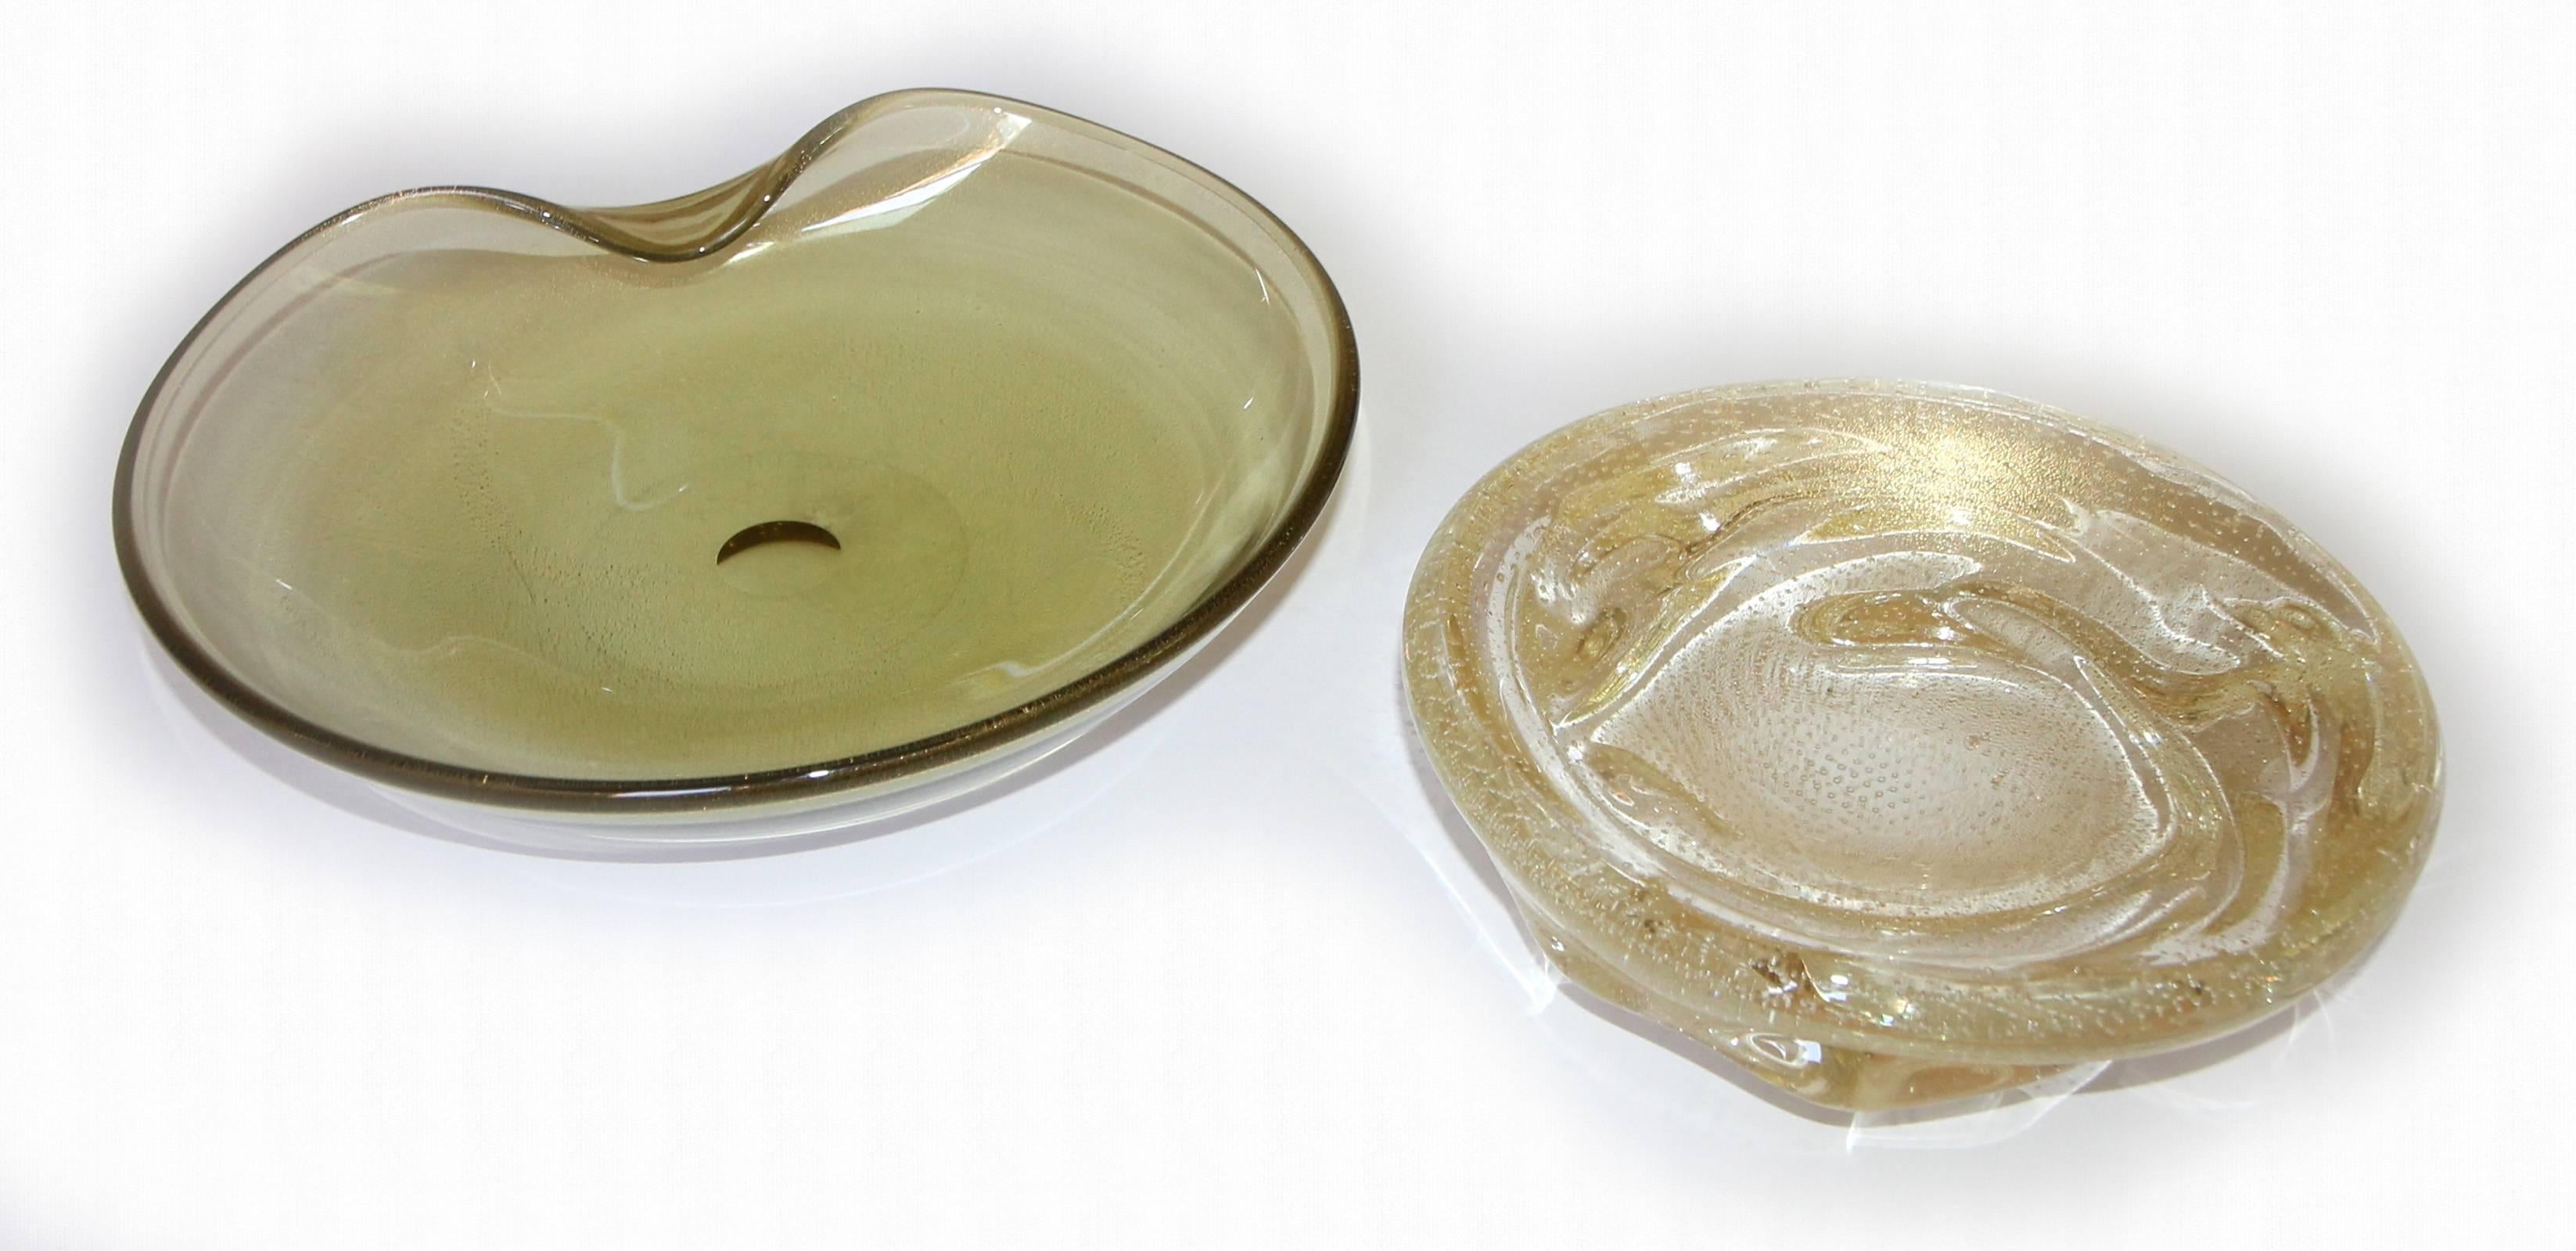 Two large Murano Italian handblown glass bowls. A clam shape bowl with gold inclusions and yellow/olive hue measure: 10" x 11.75", the other bowl in organic form with gold inclusion and controlled bubbles 9" diameter.